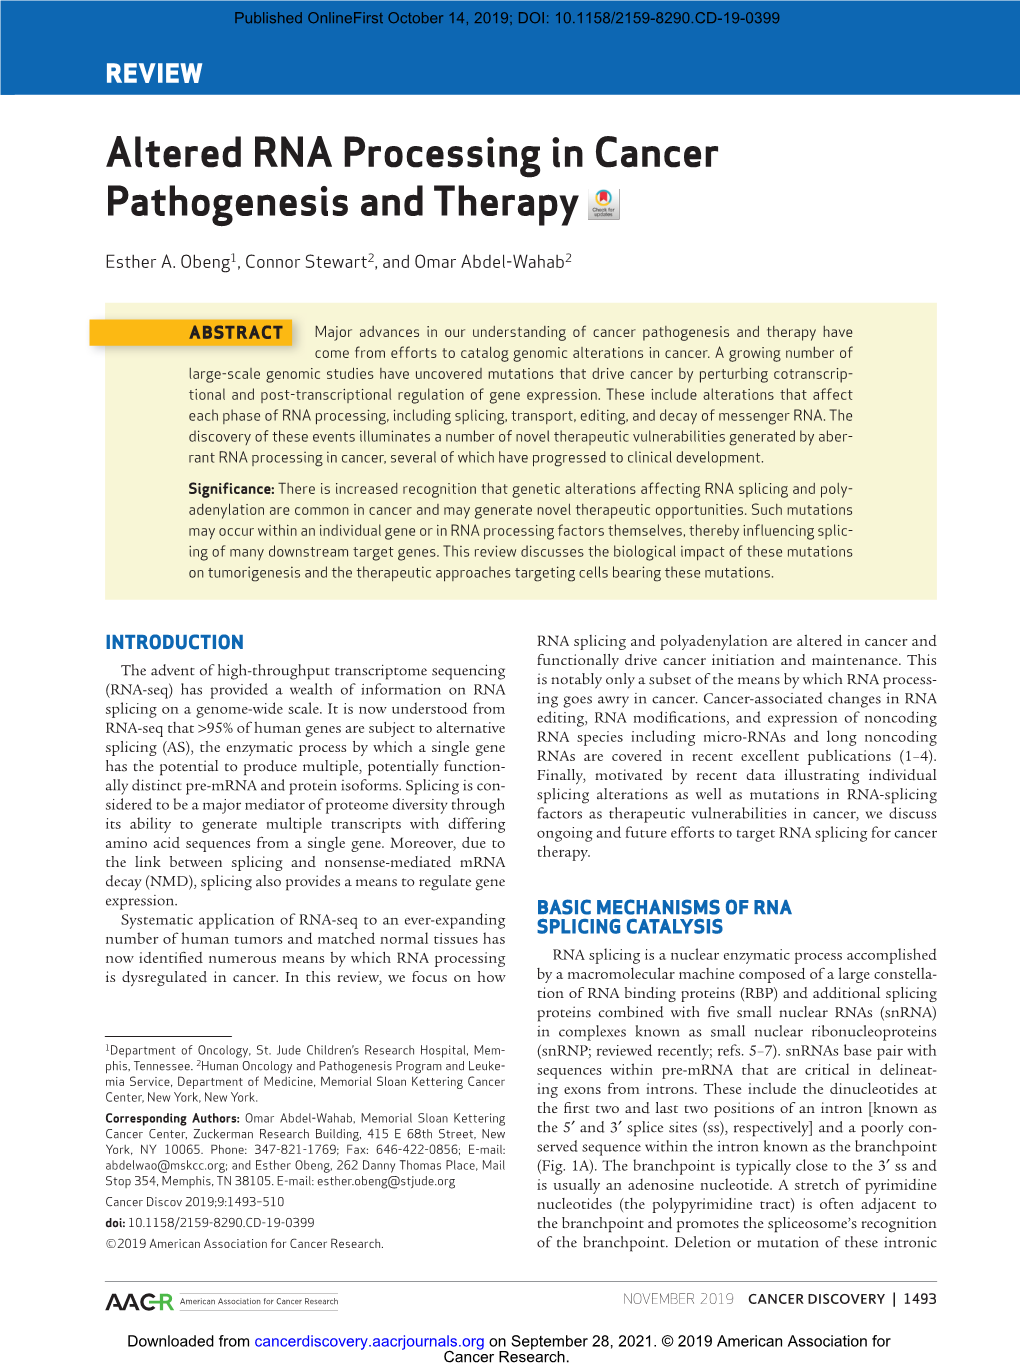 Altered RNA Processing in Cancer Pathogenesis and Therapy